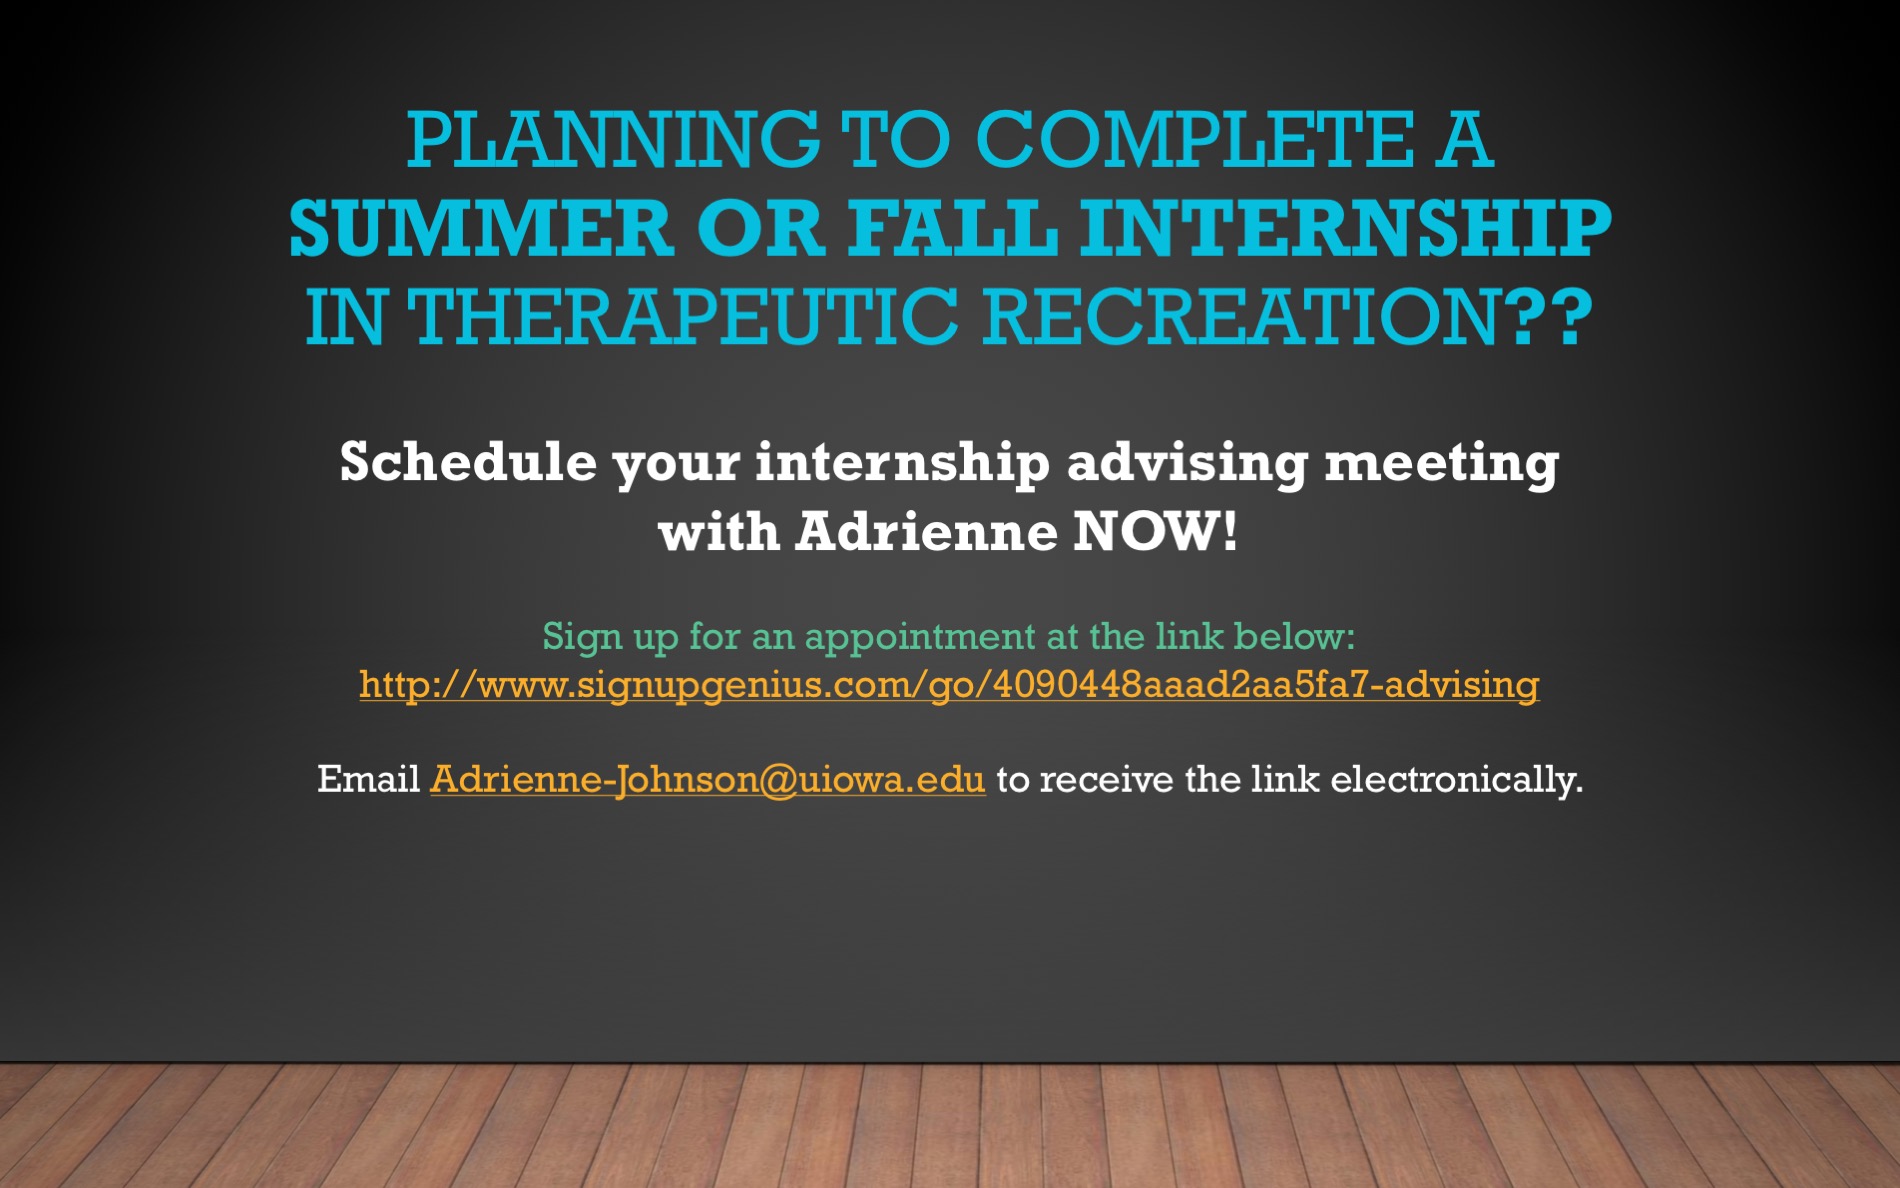 Schedule your Summer or Fall TR Internship now.